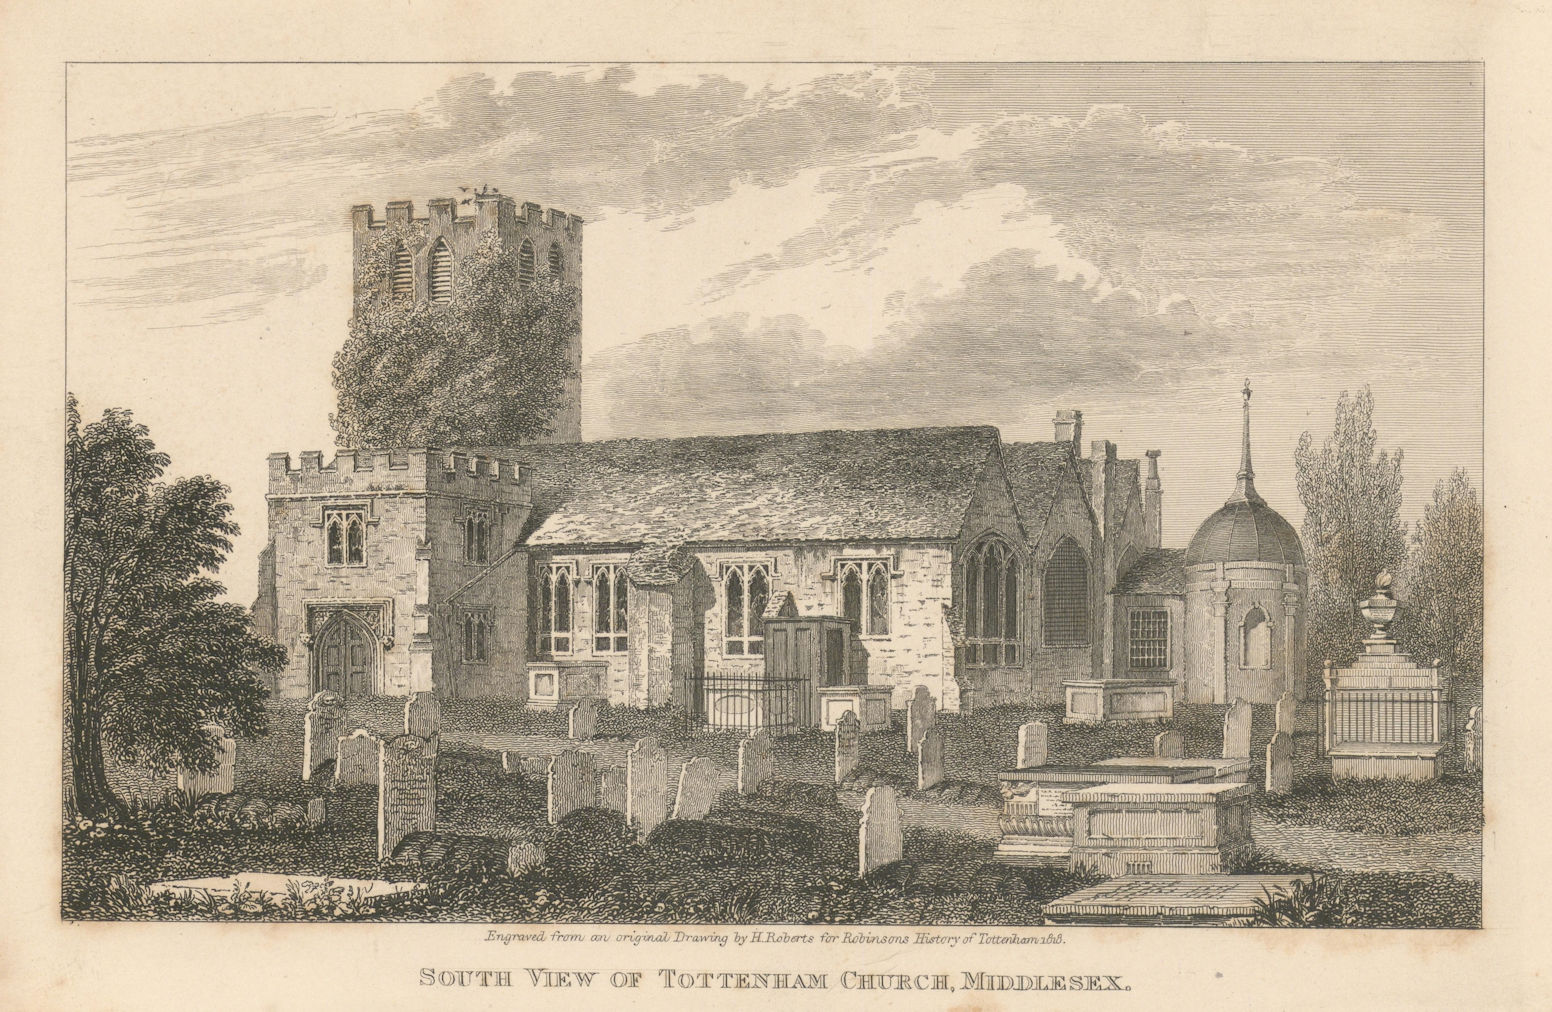 South View of All Hallows Church, Tottenham, London 1840 old antique print